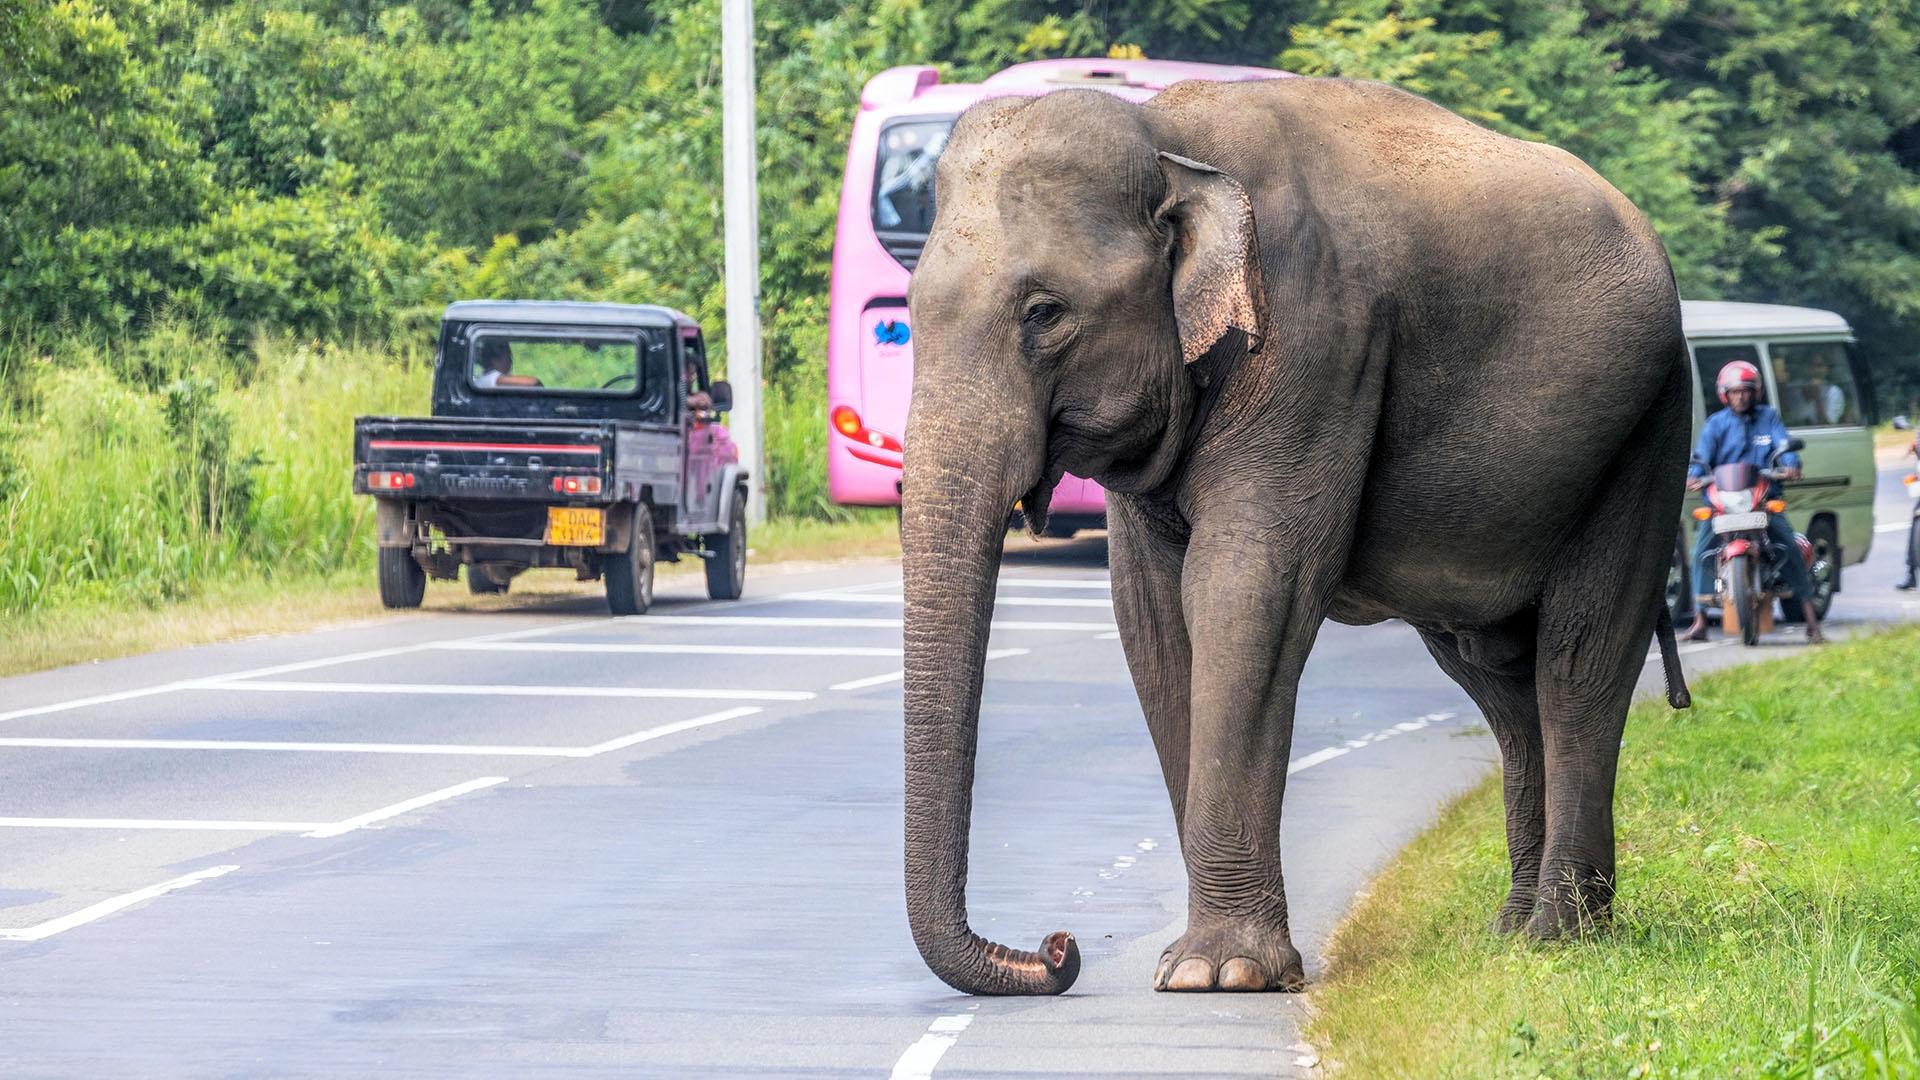 Close image of elephant on a road